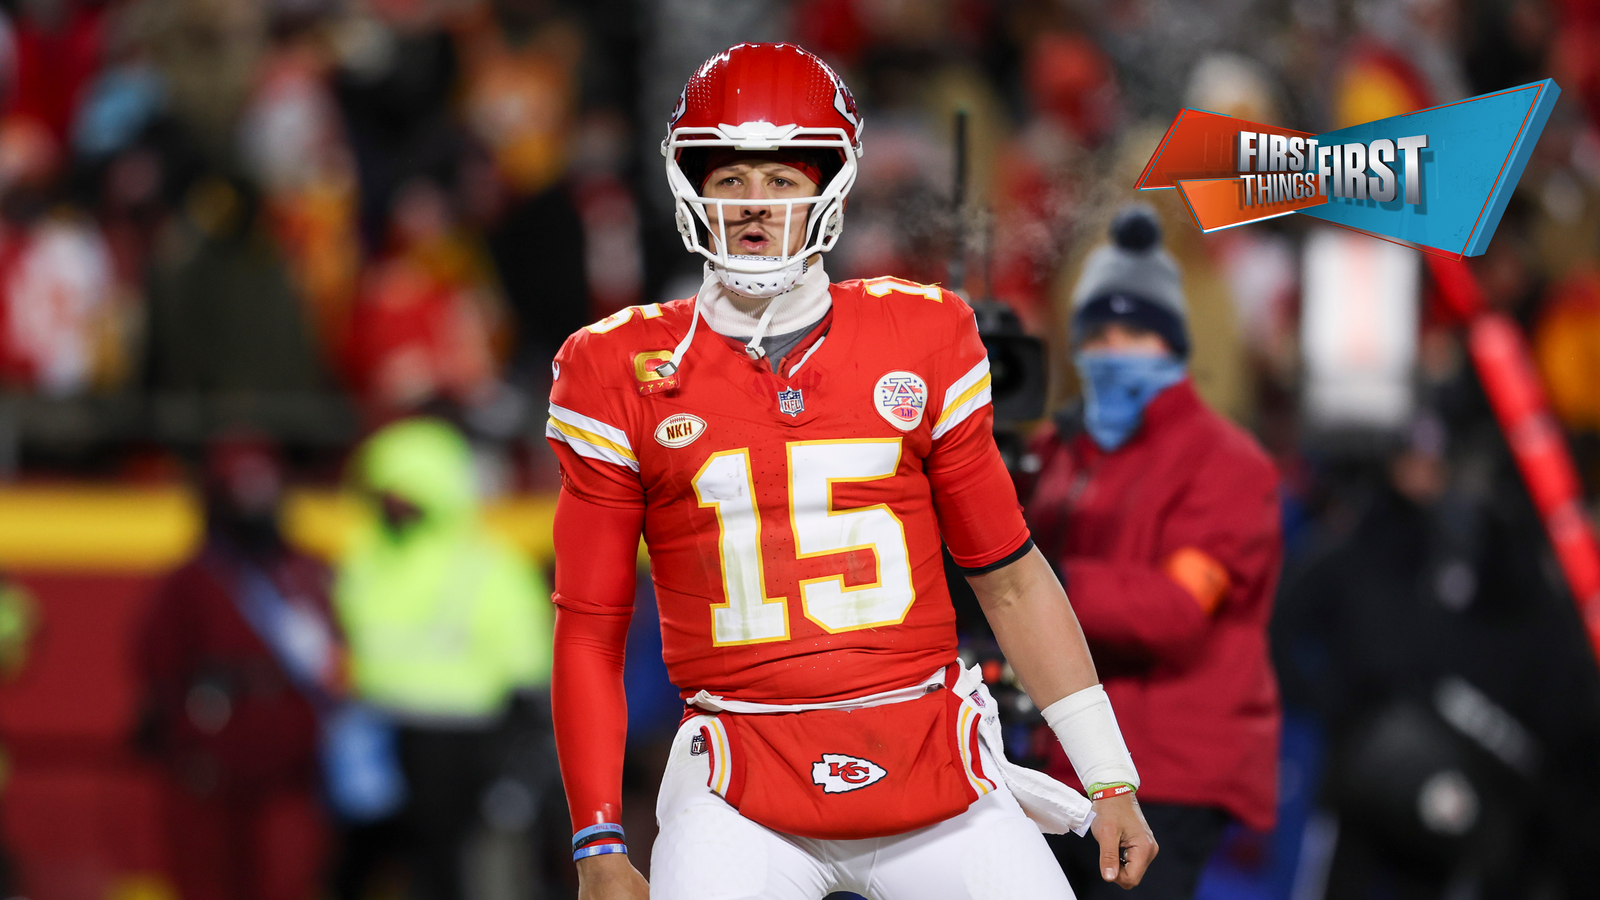 What was the biggest reason the Chiefs beat the Dolphins?